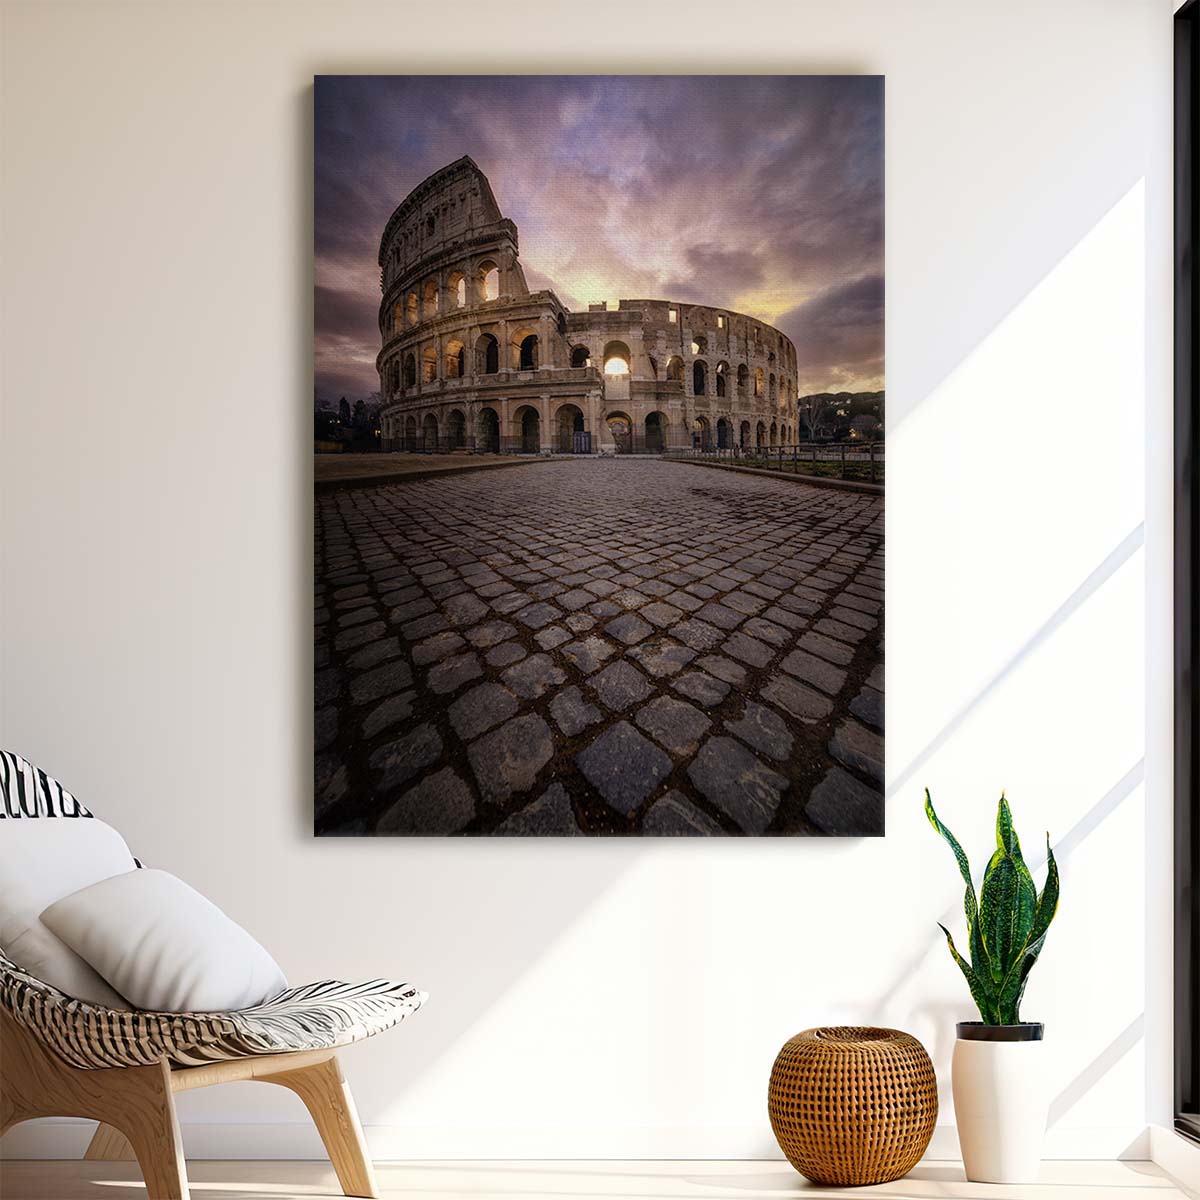 Iconic Colosseum Rome Photography Ancient Italian Arena Artwork by Luxuriance Designs, made in USA